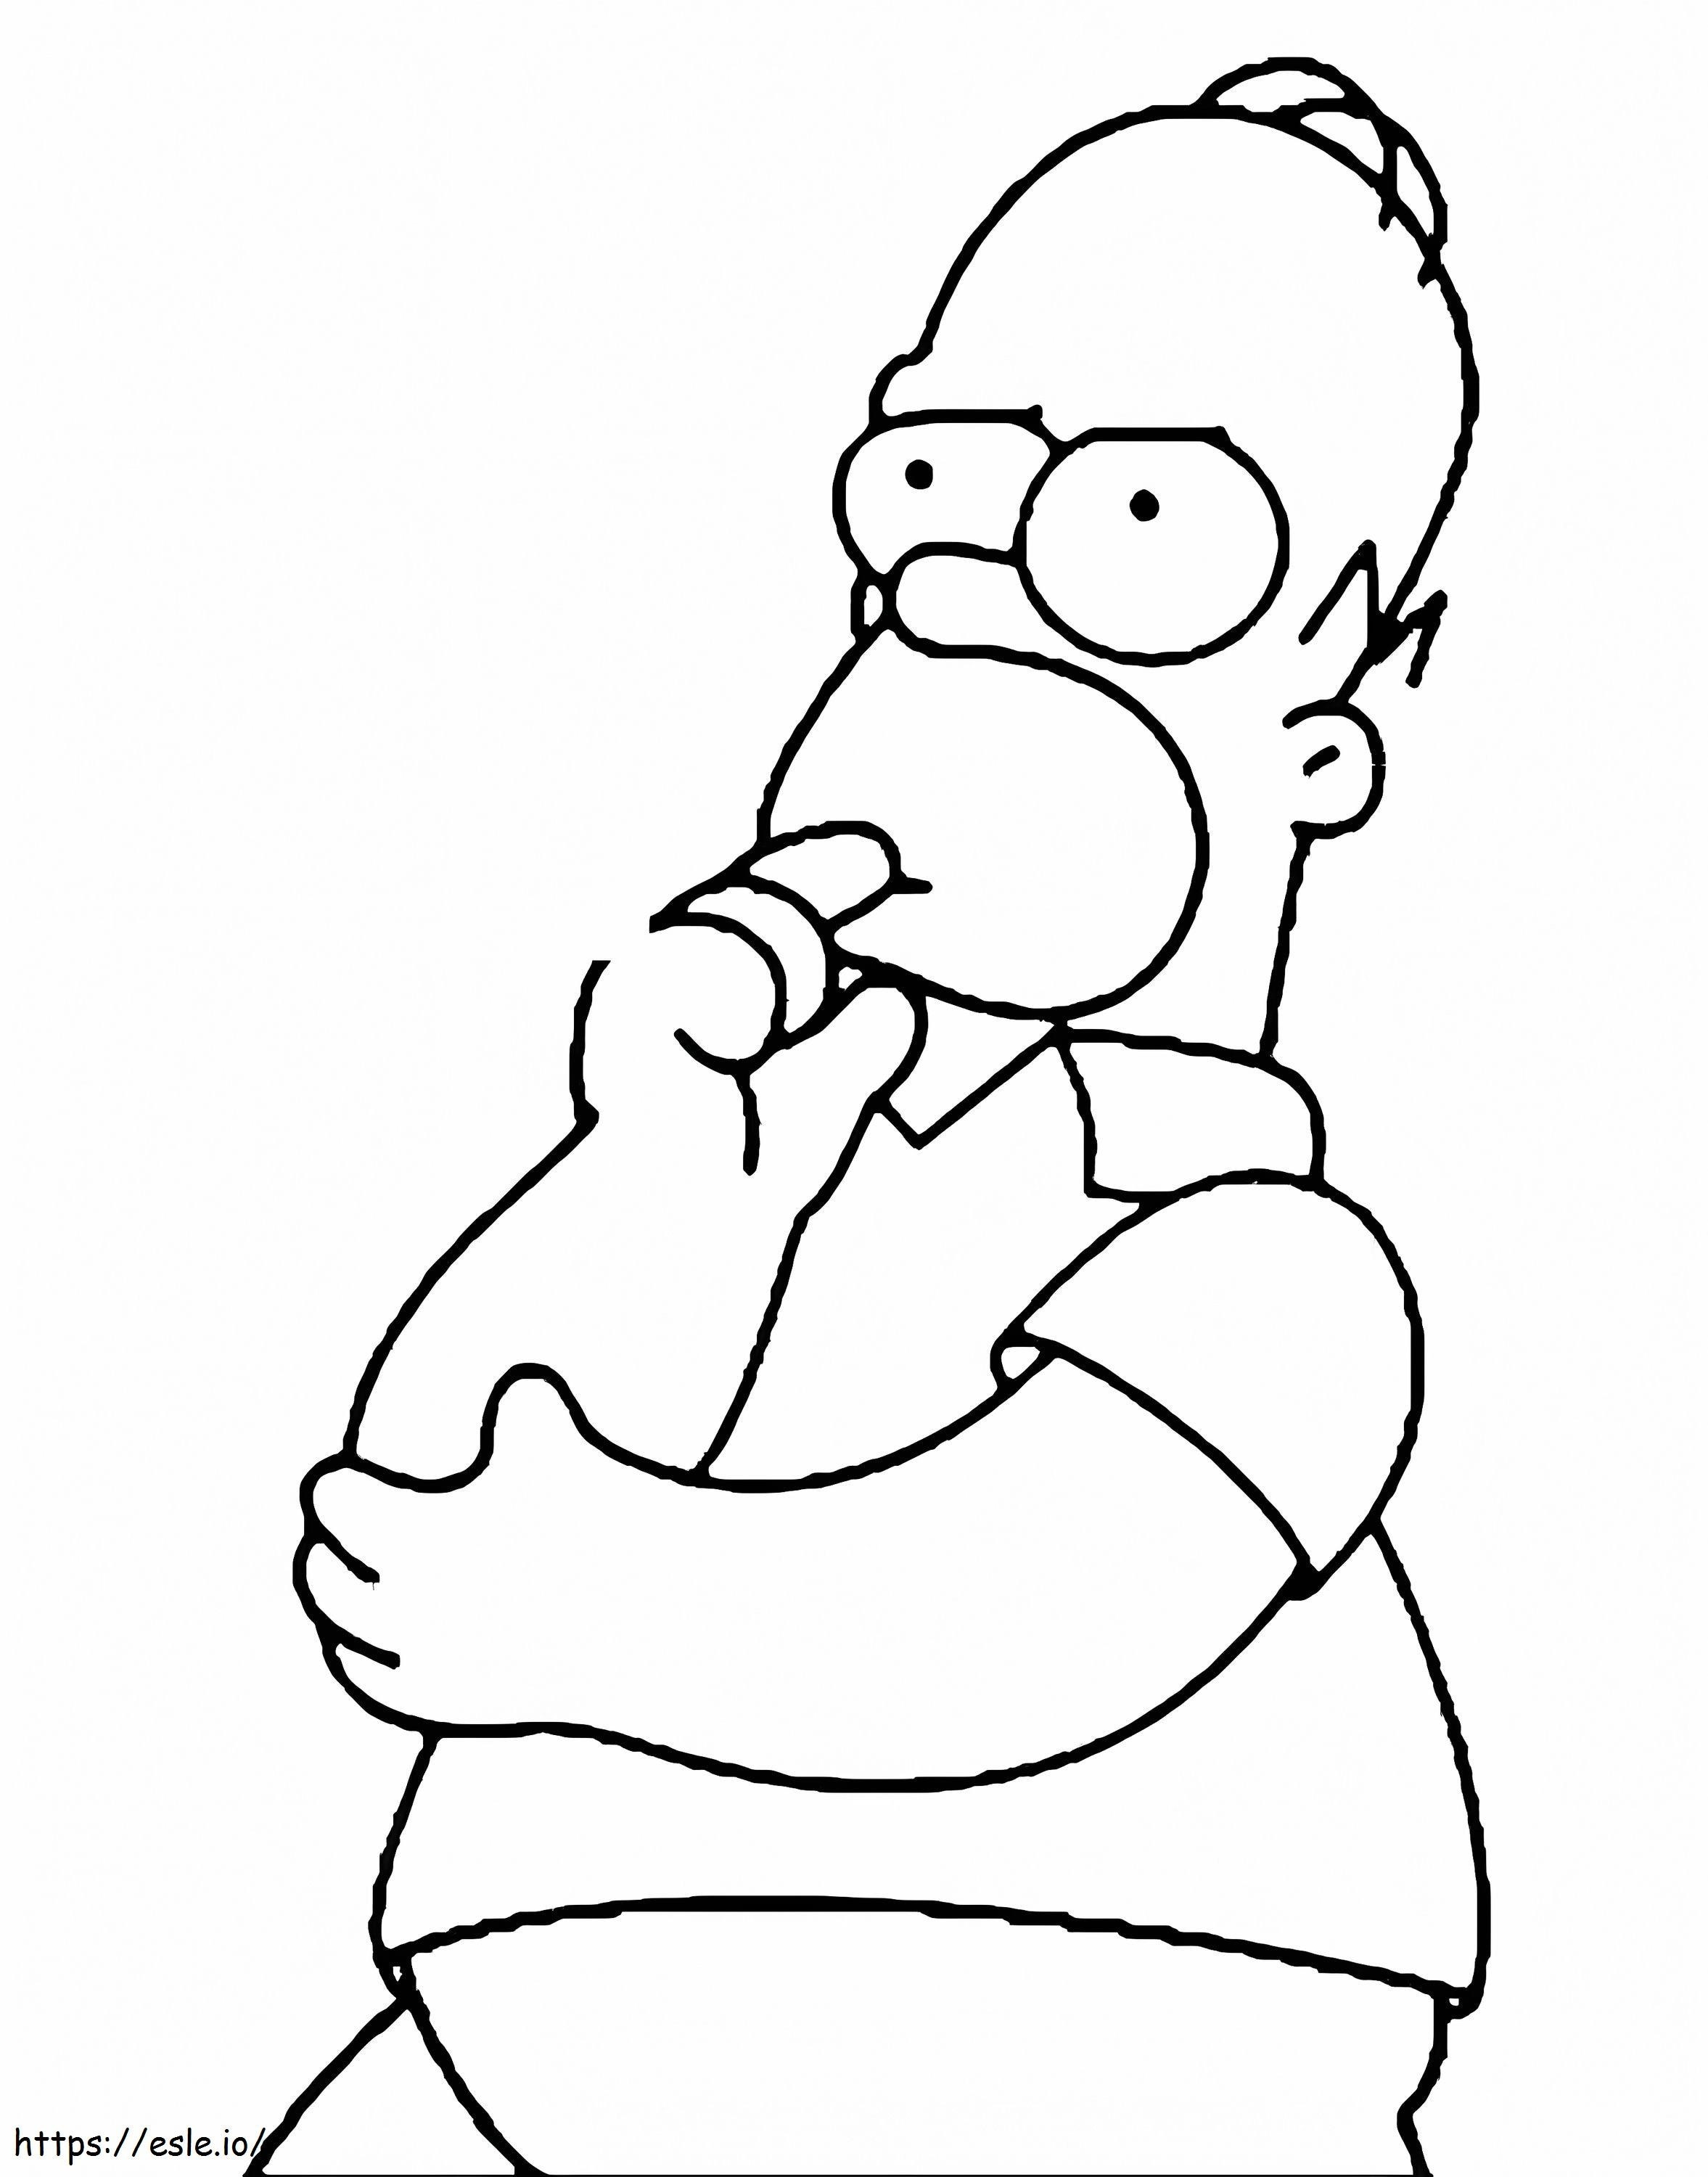 Homer Simpson Thinking coloring page